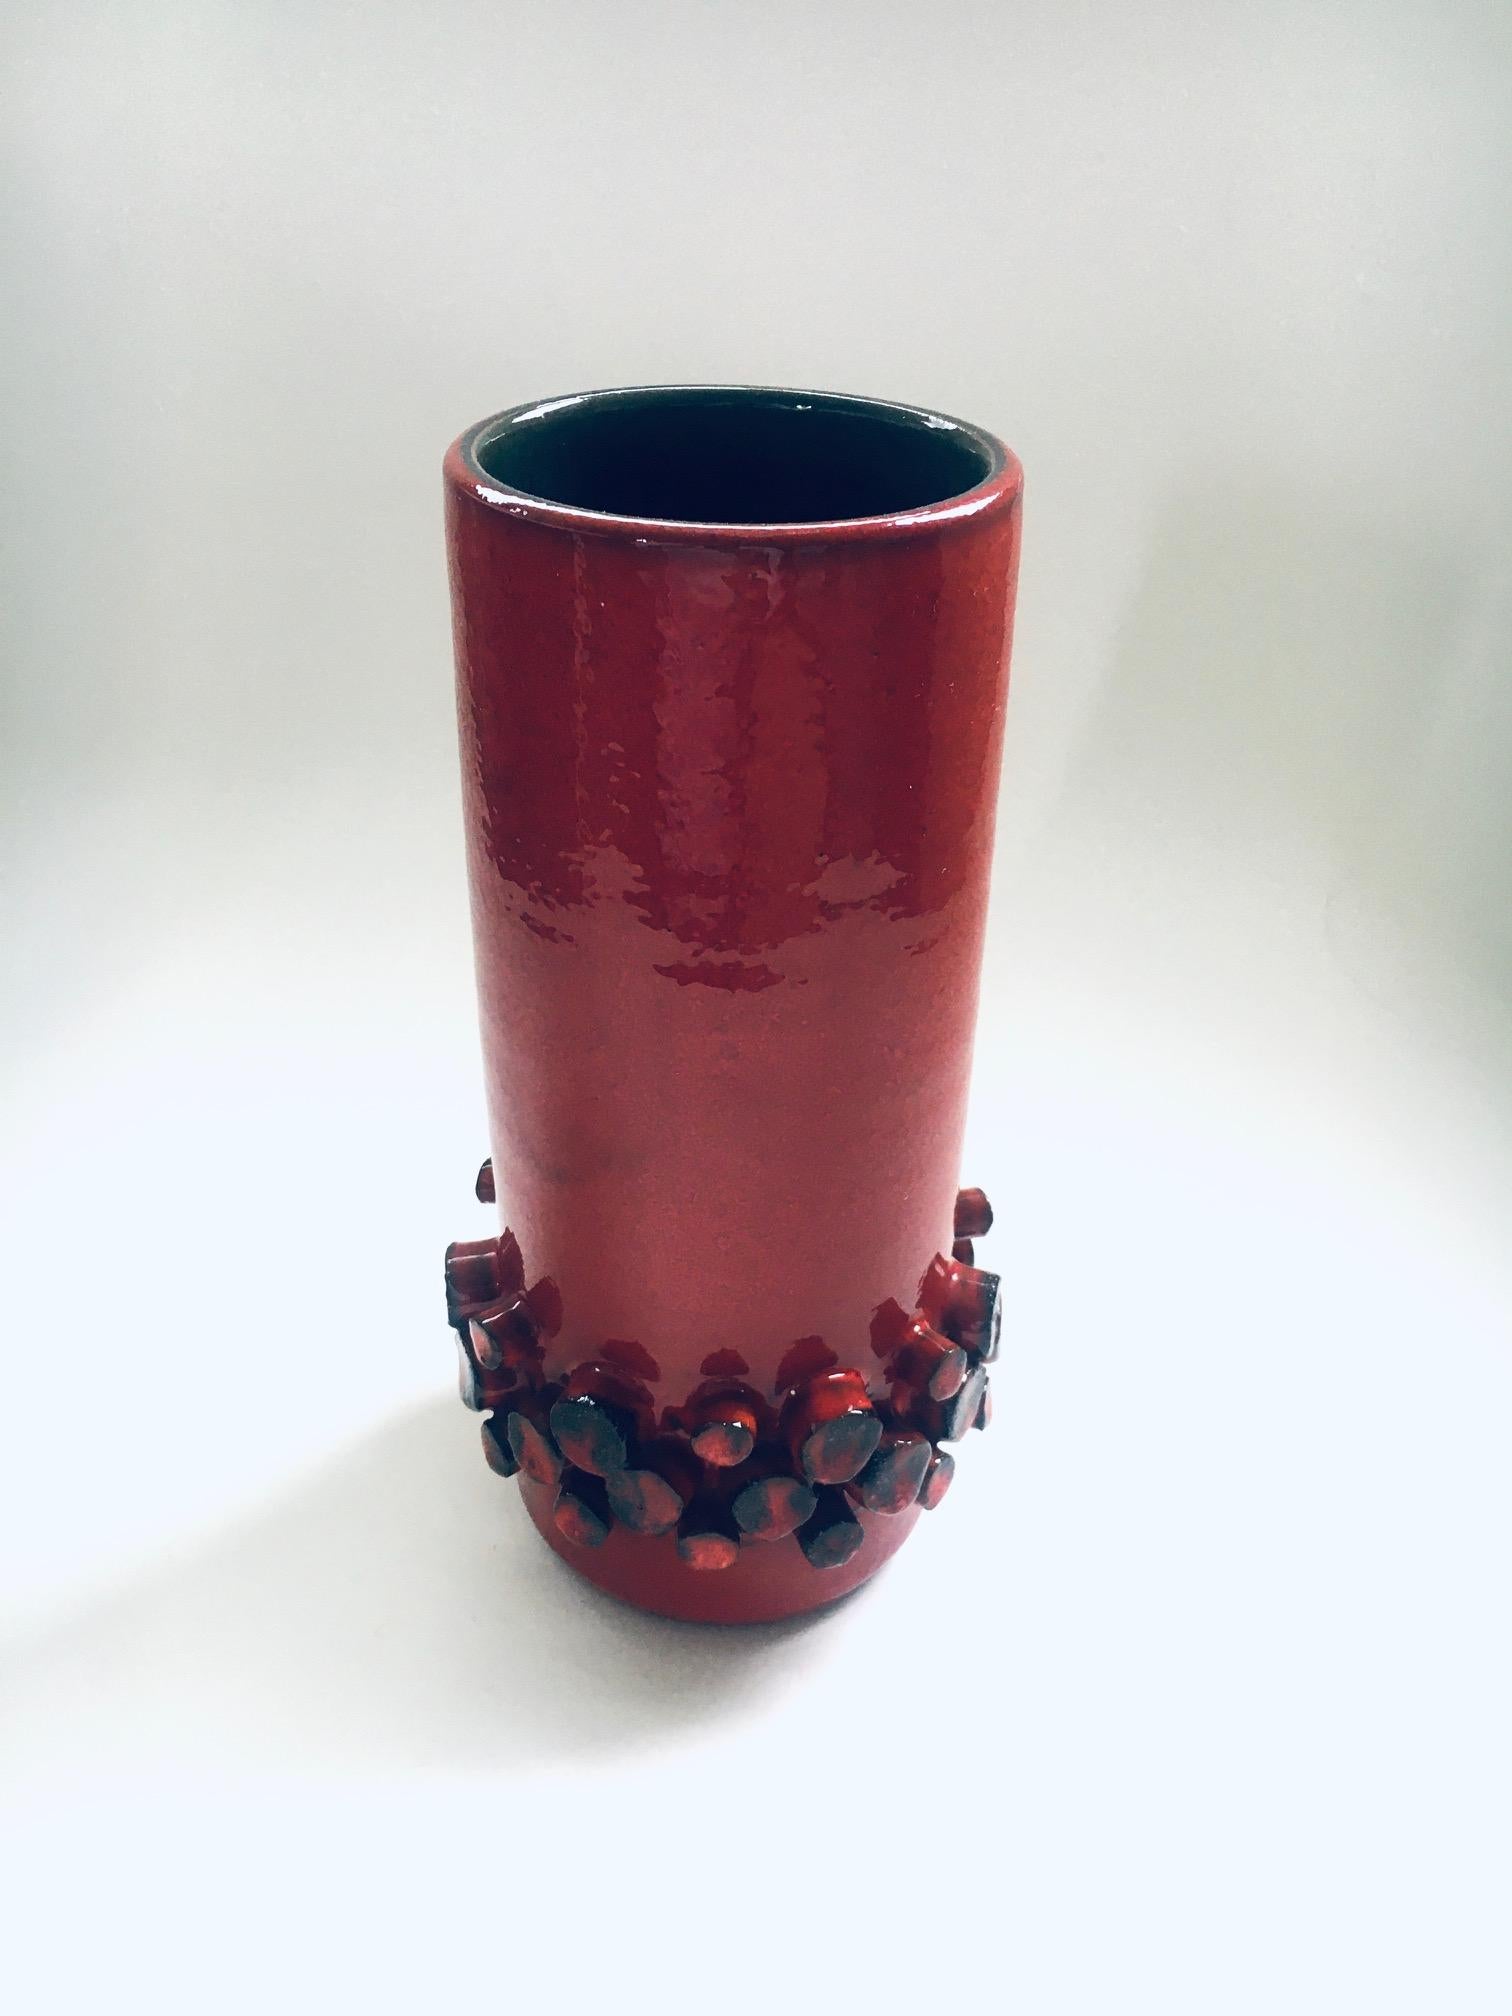 Mid-20th Century Art Studio Pottery Vase by Hans Welling for Ceramano Ceralux, 1960's Germany